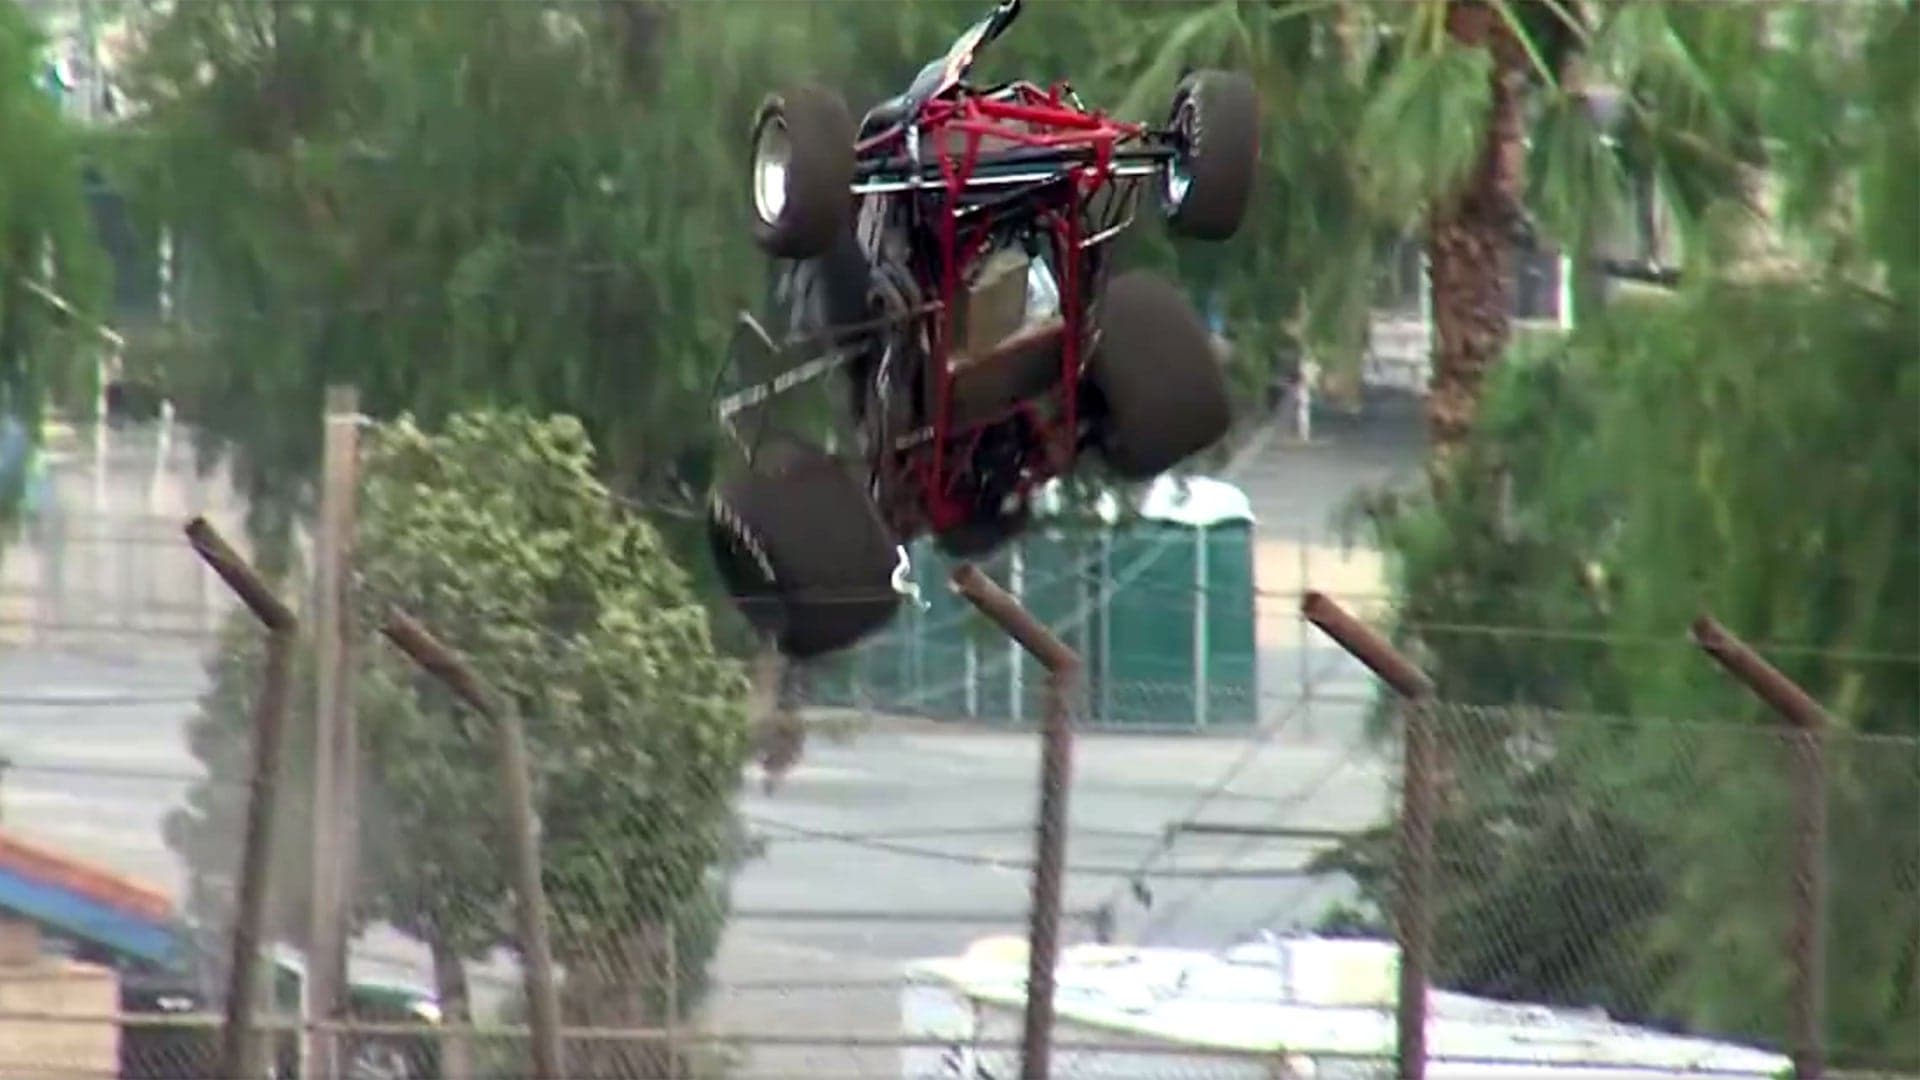 See This Crashing Sprint Car Go Flying Over the Catch Fence